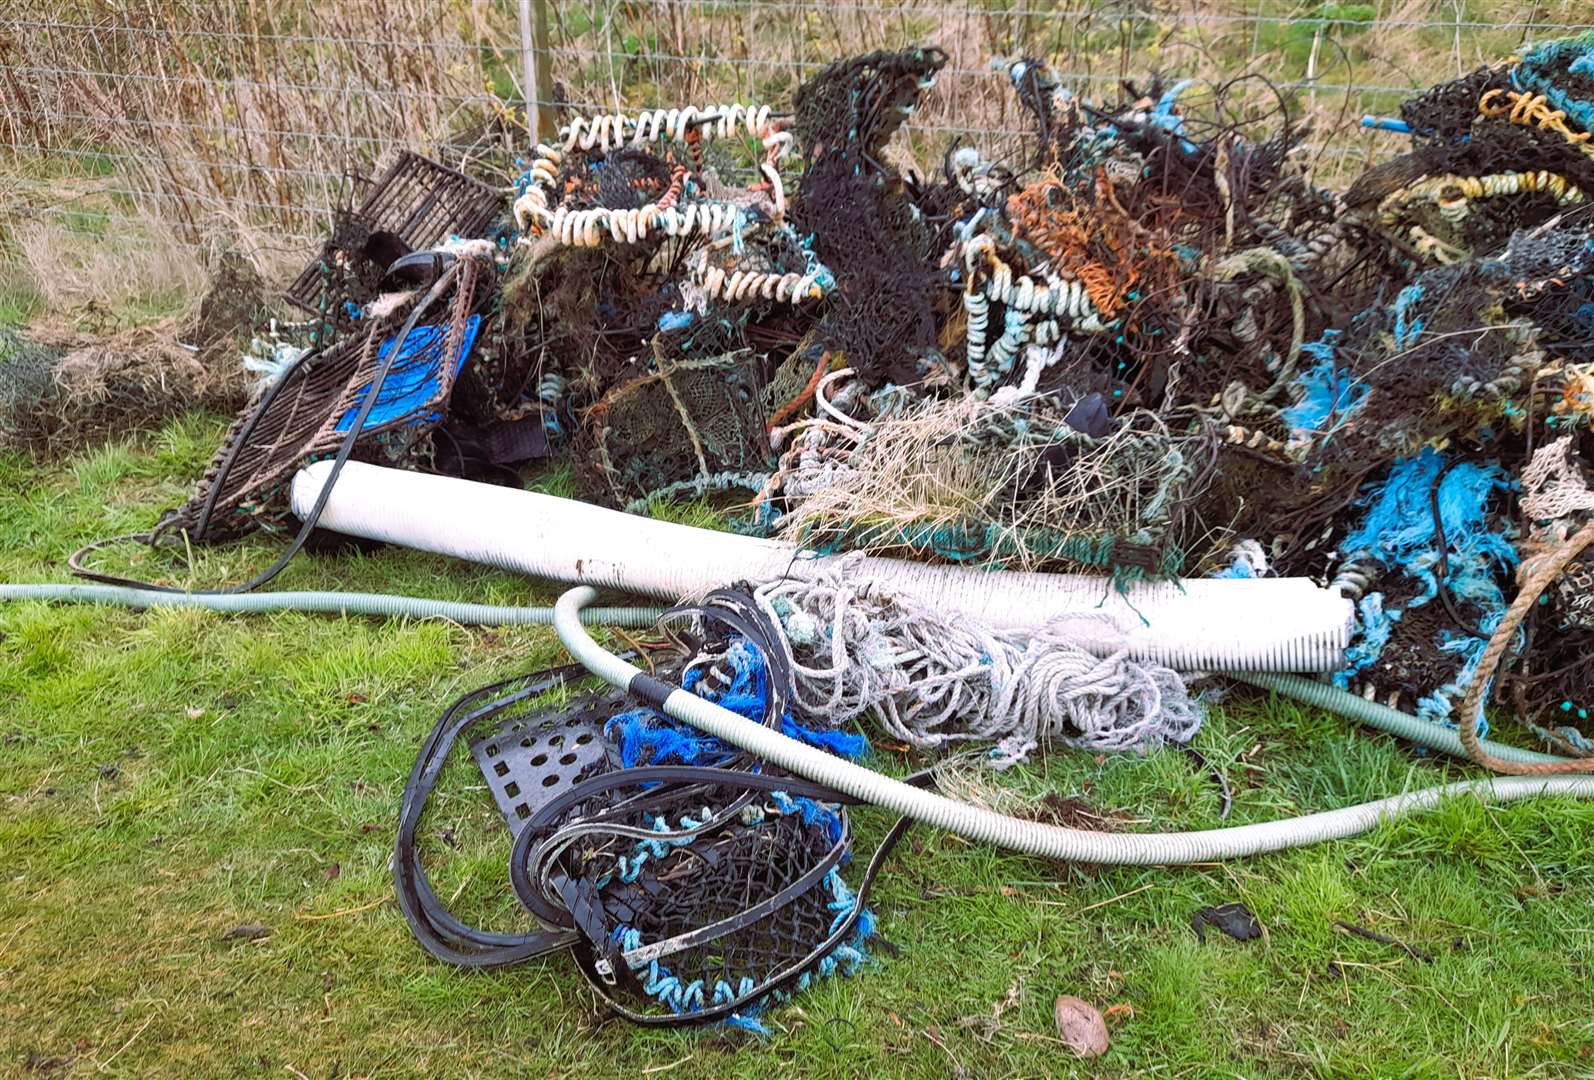 Many fishing creels were found. Picture: Caithness Beach Cleans